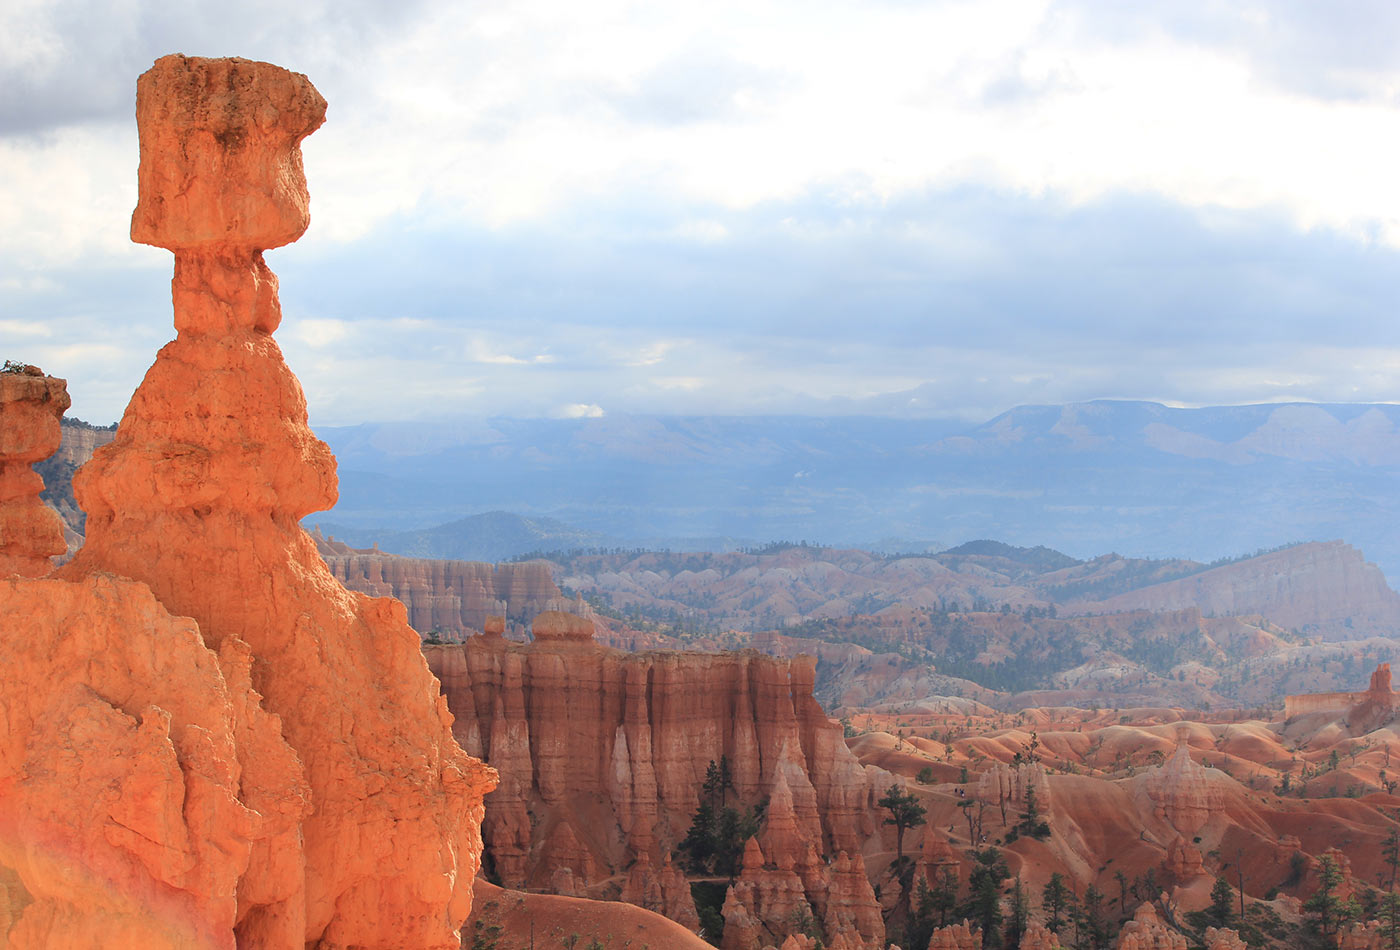 Thor's Hammer, Bryce Canyon National Park.